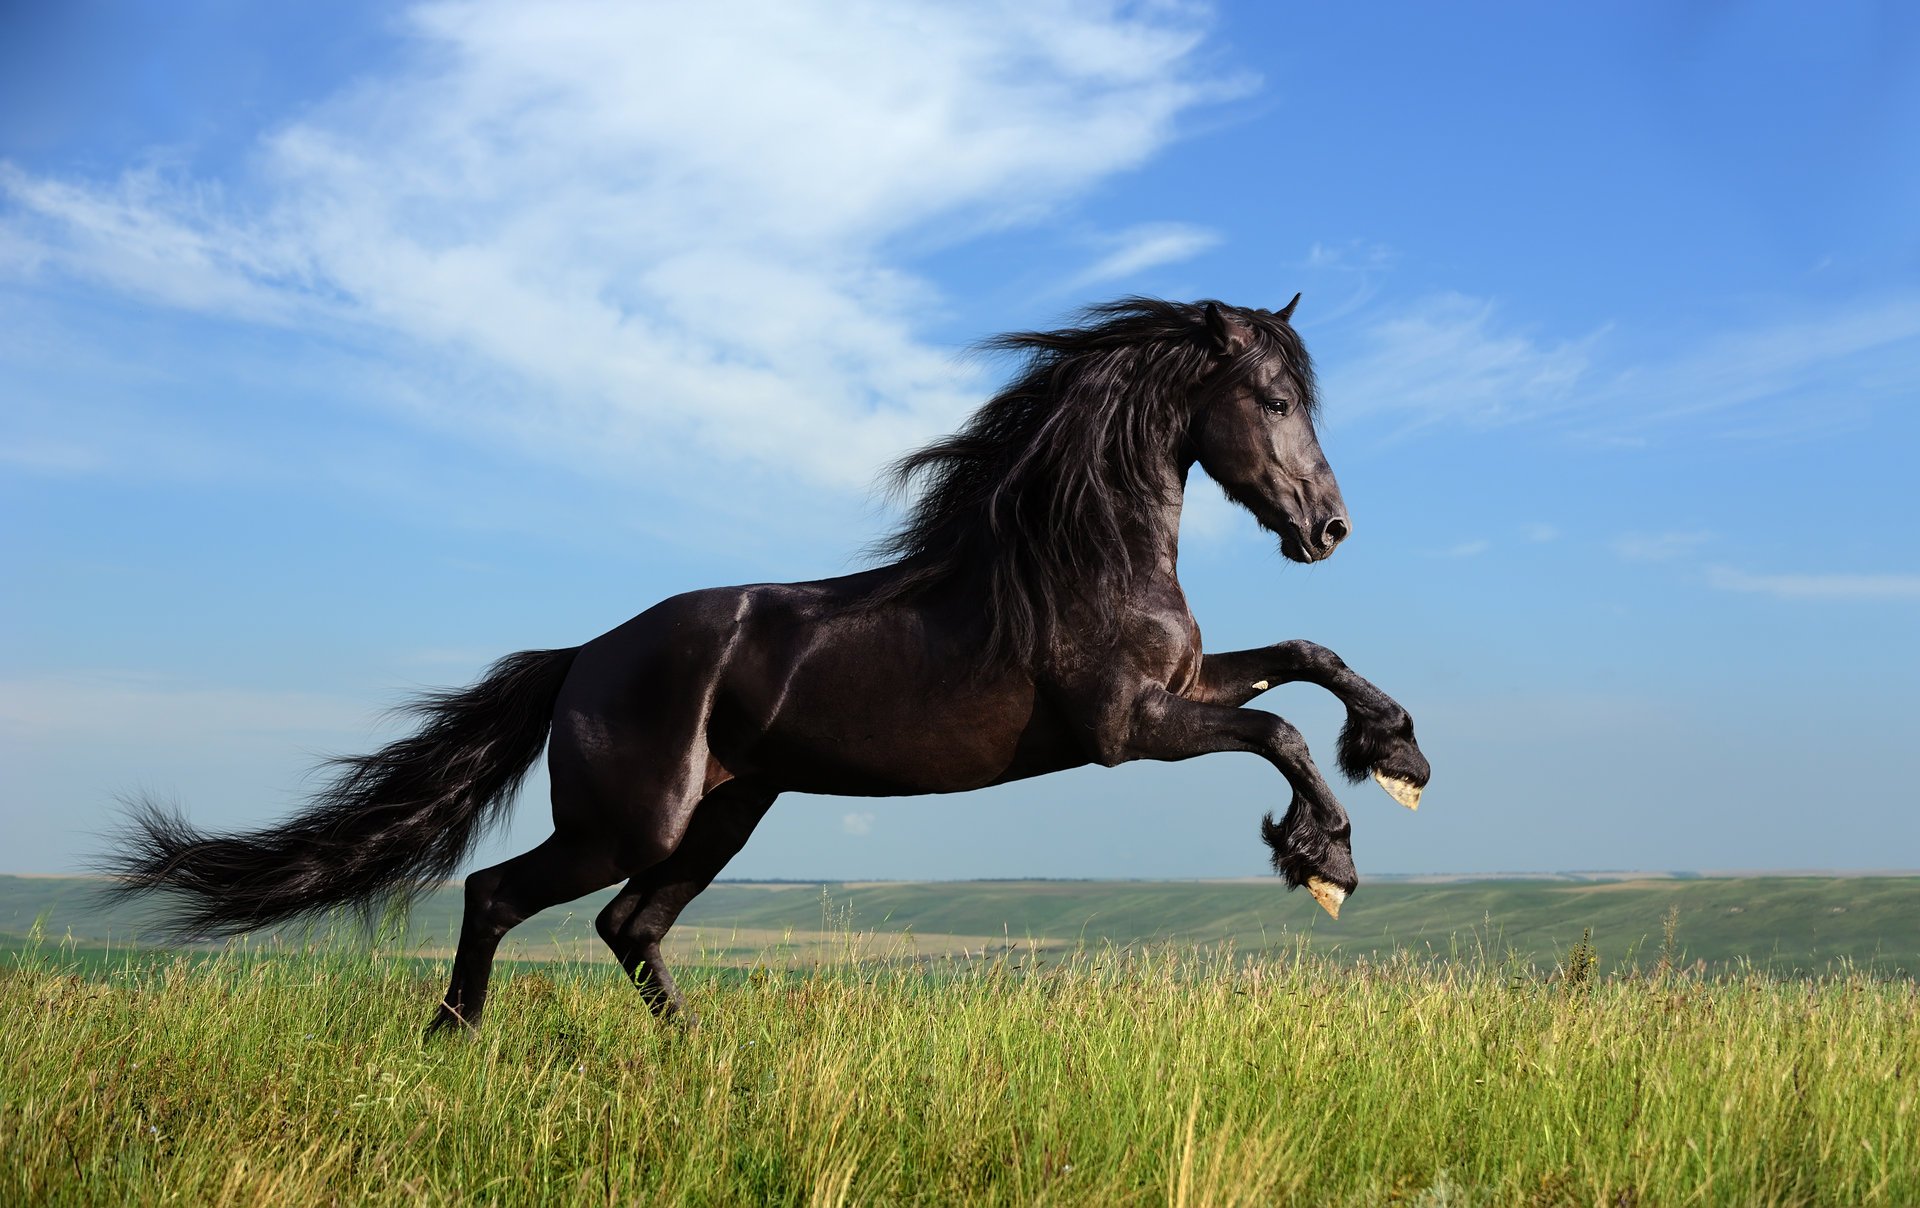 A horse with a thick mane jumps on the green grass